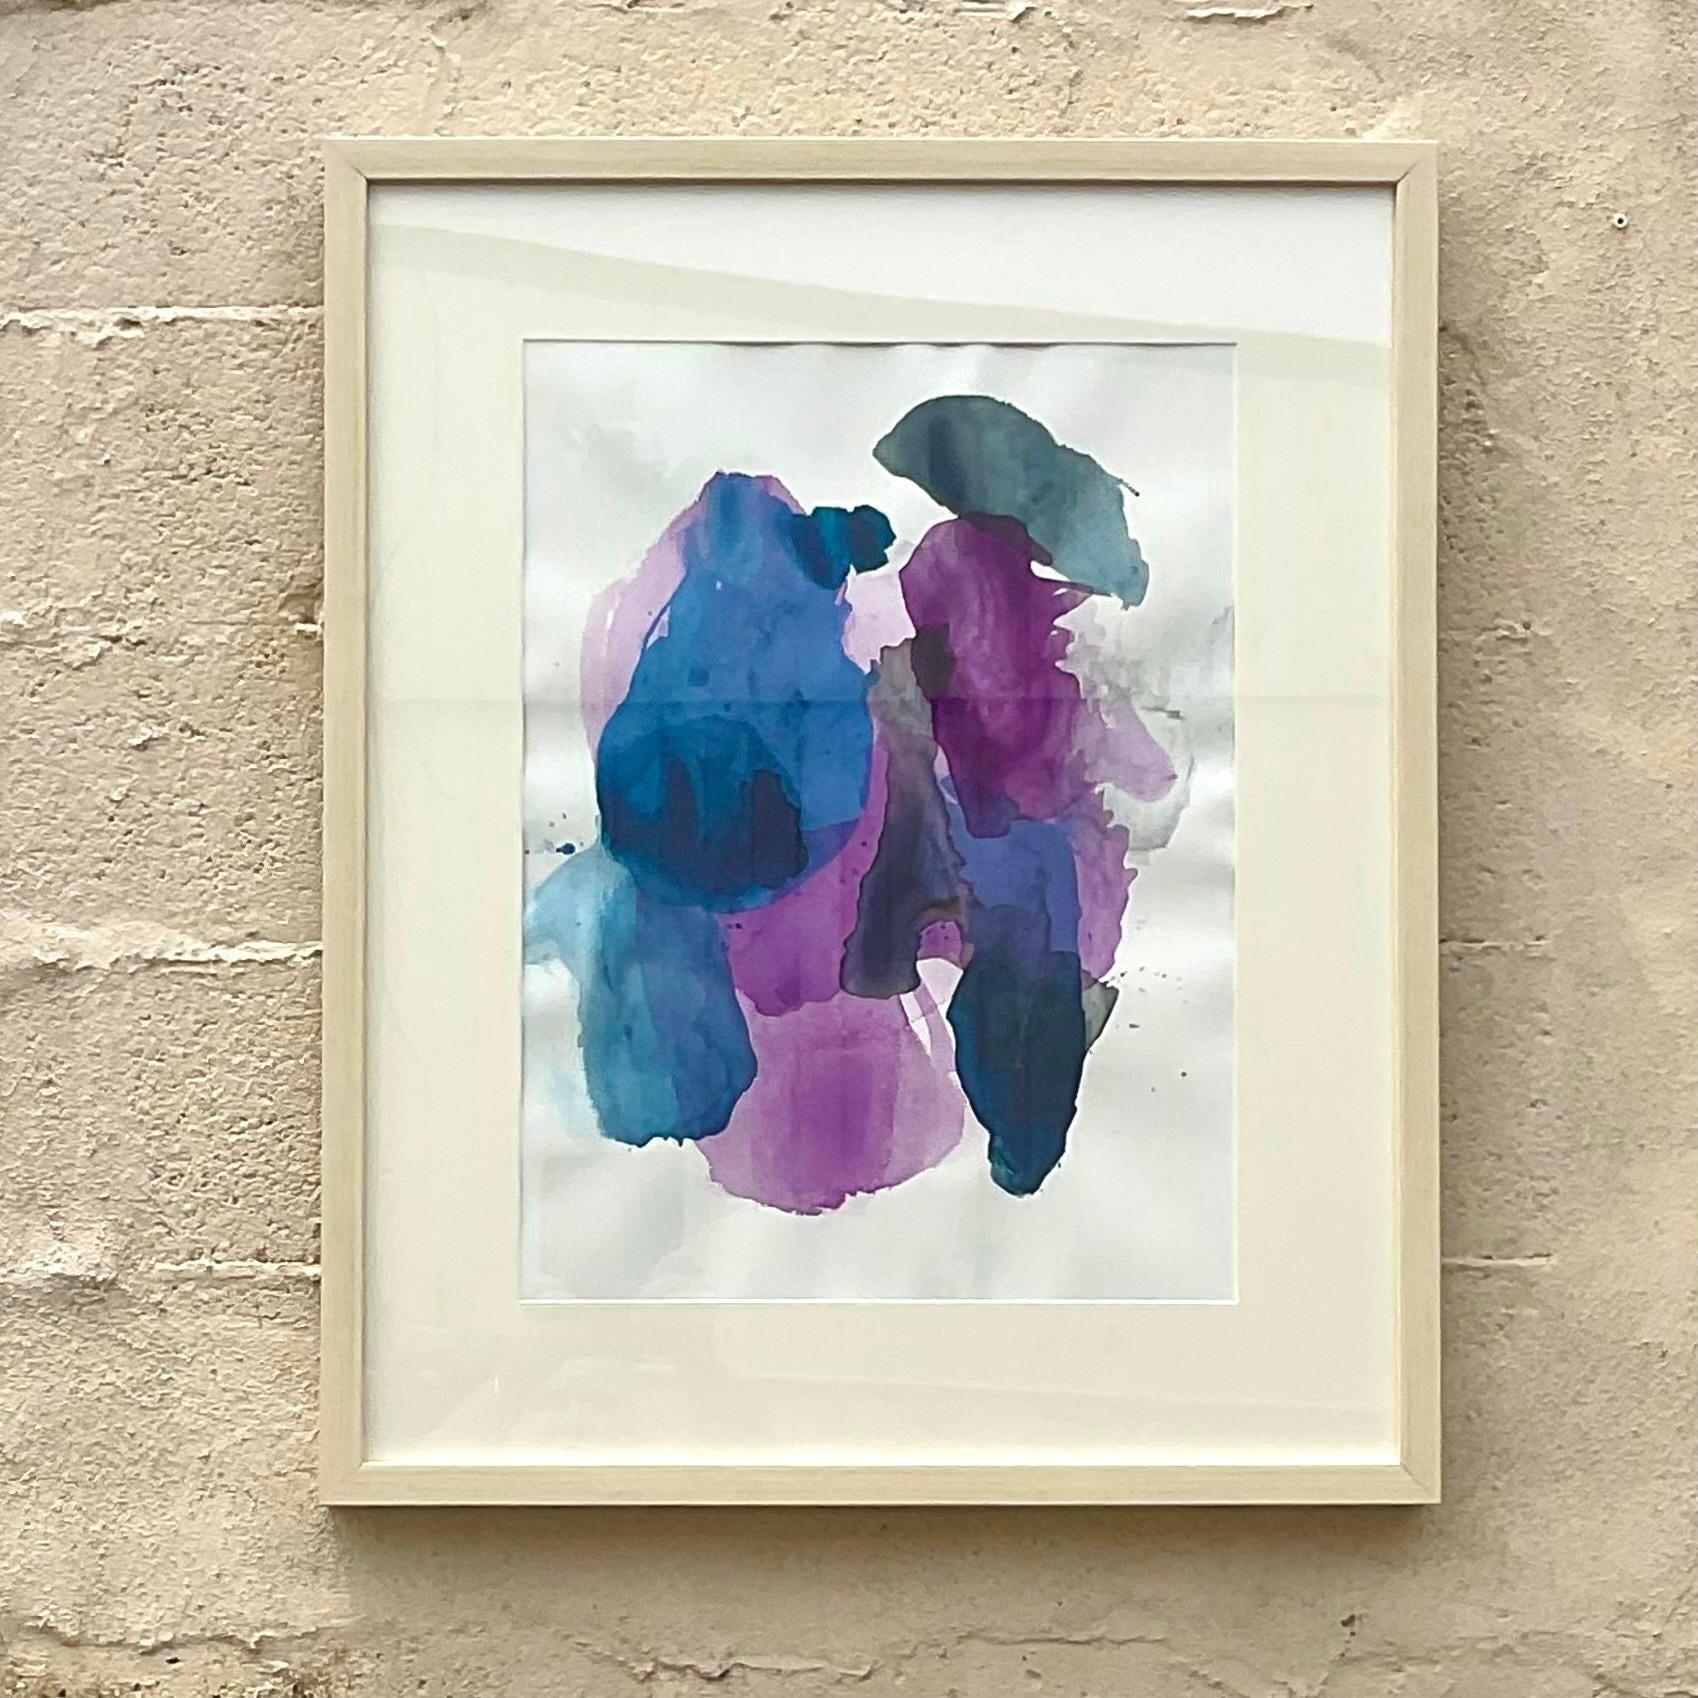 A stunning vintage Boho original watercolor on paper. A chic Abstract composing in brilliant colors. Signed en verso. Acquired from a Palm Beach estate.